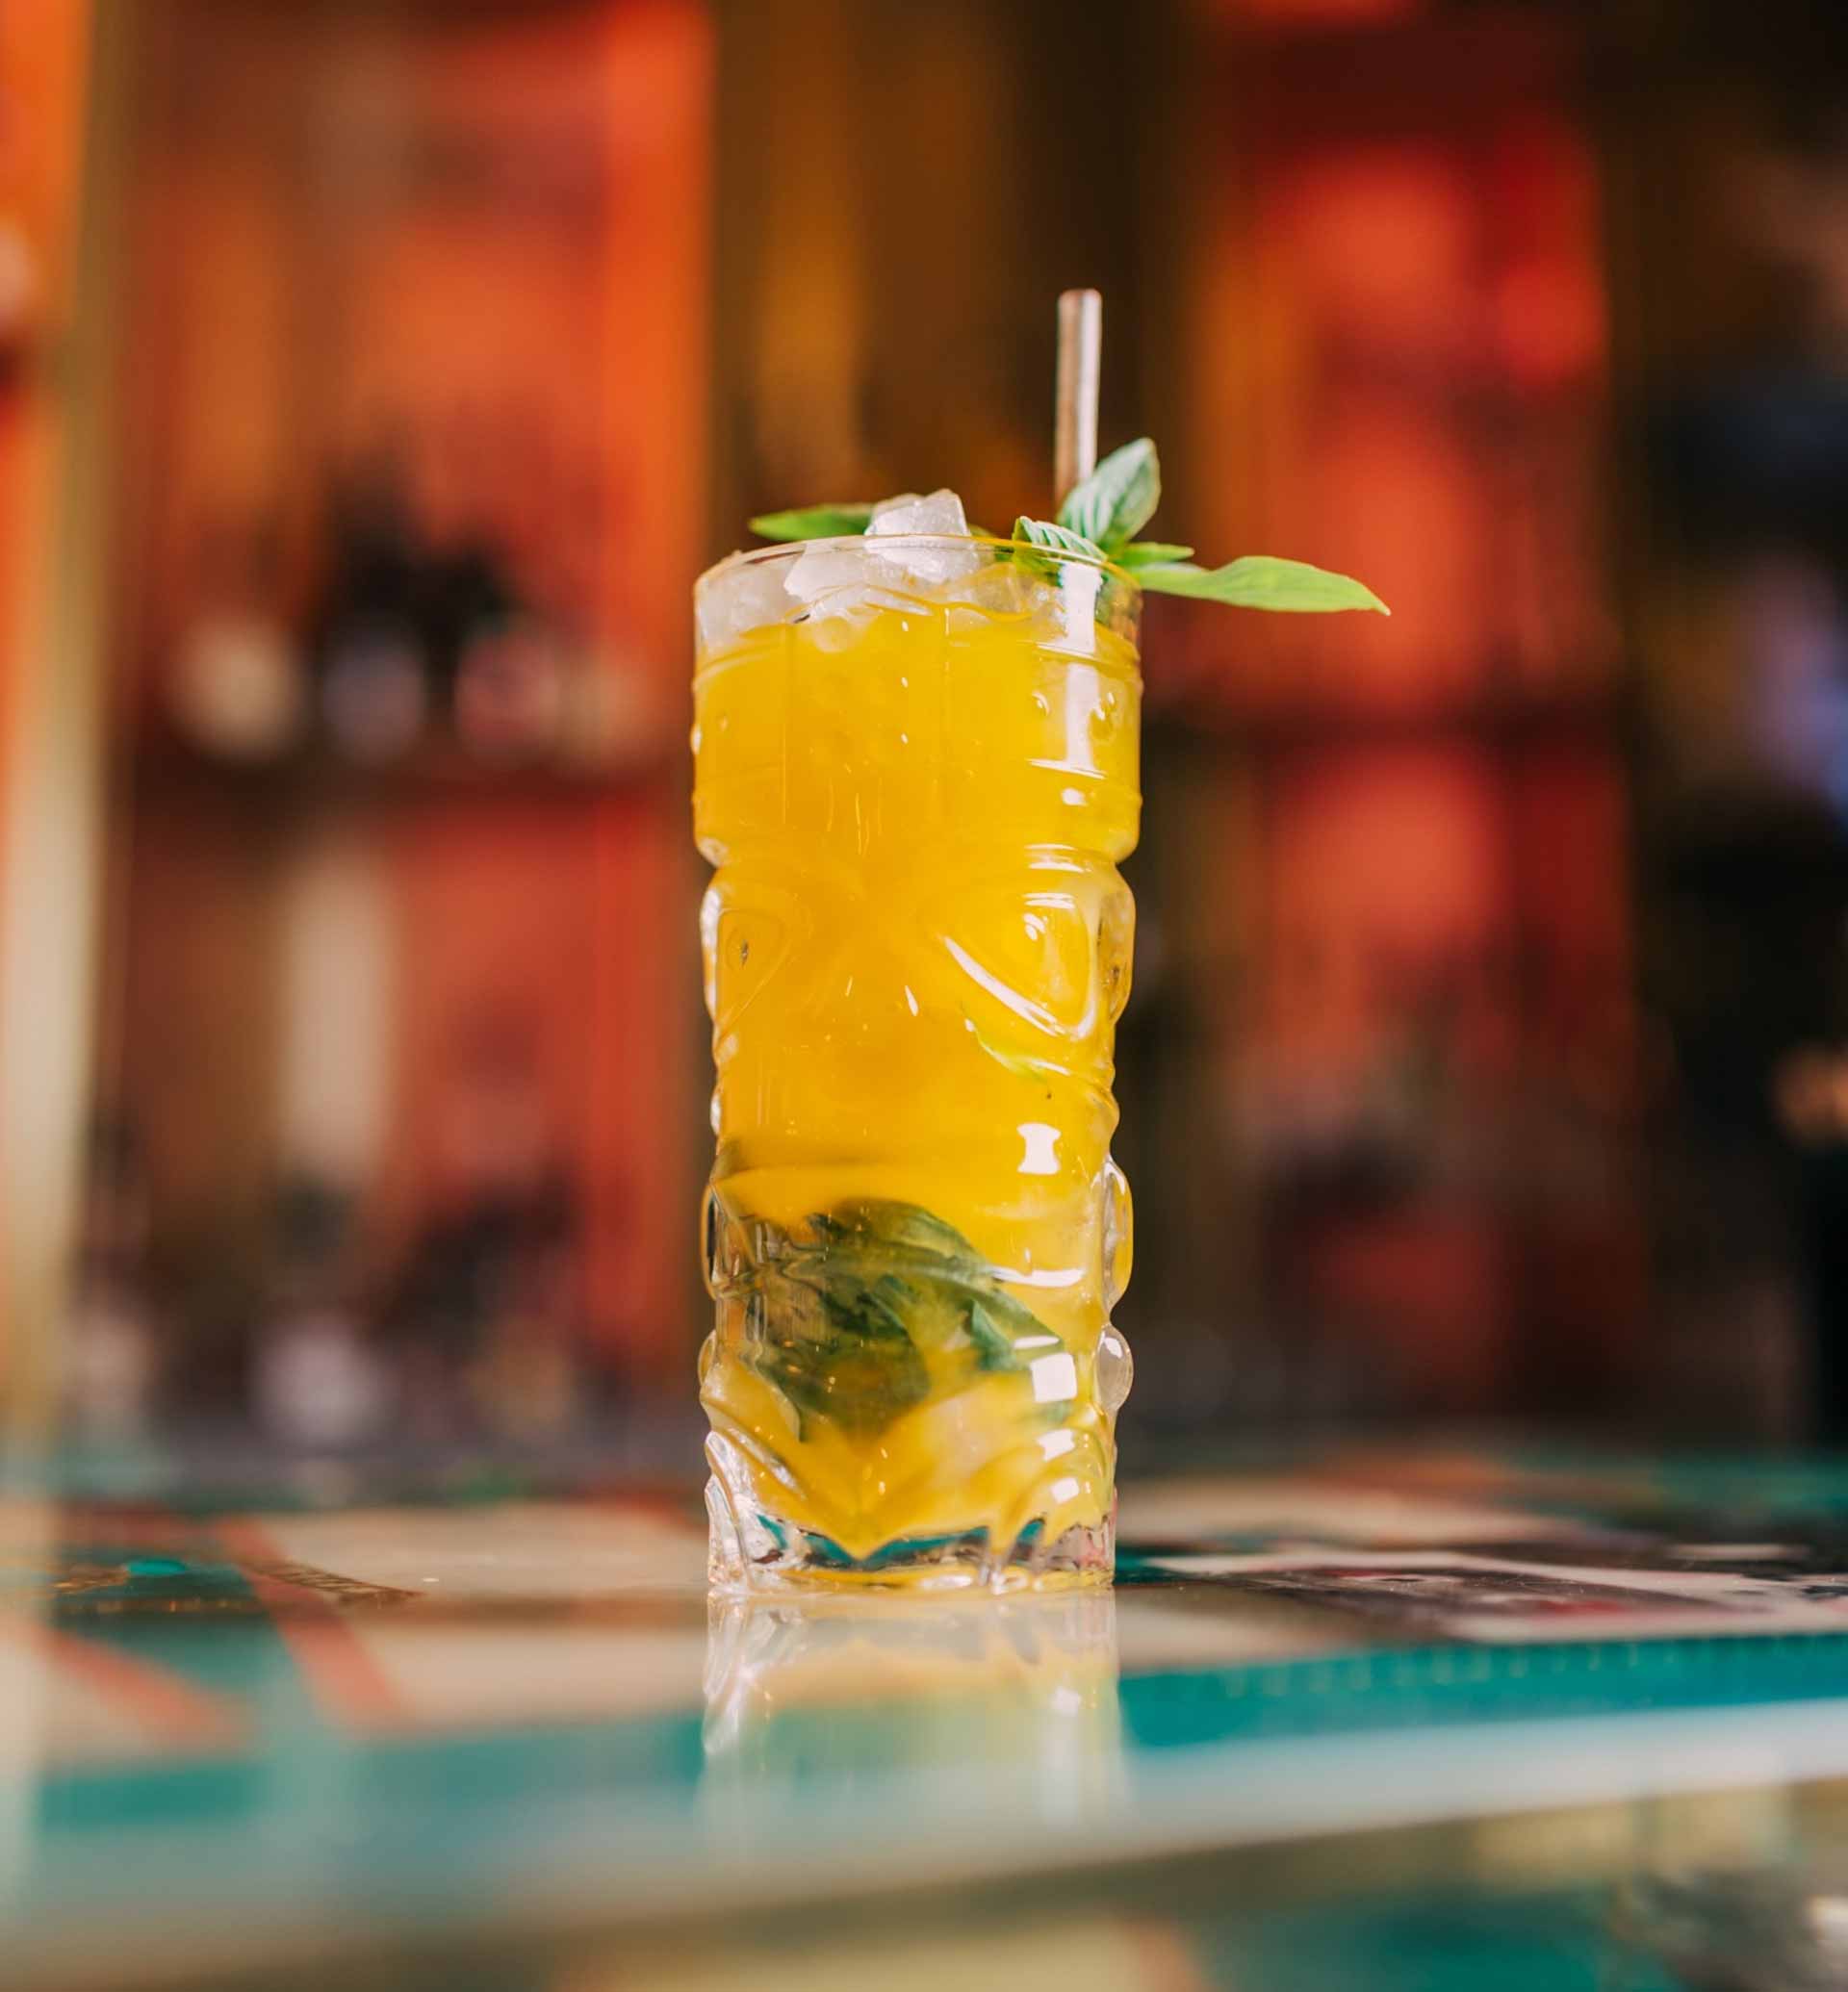 Try this Farsides signature cocktail on your next visit